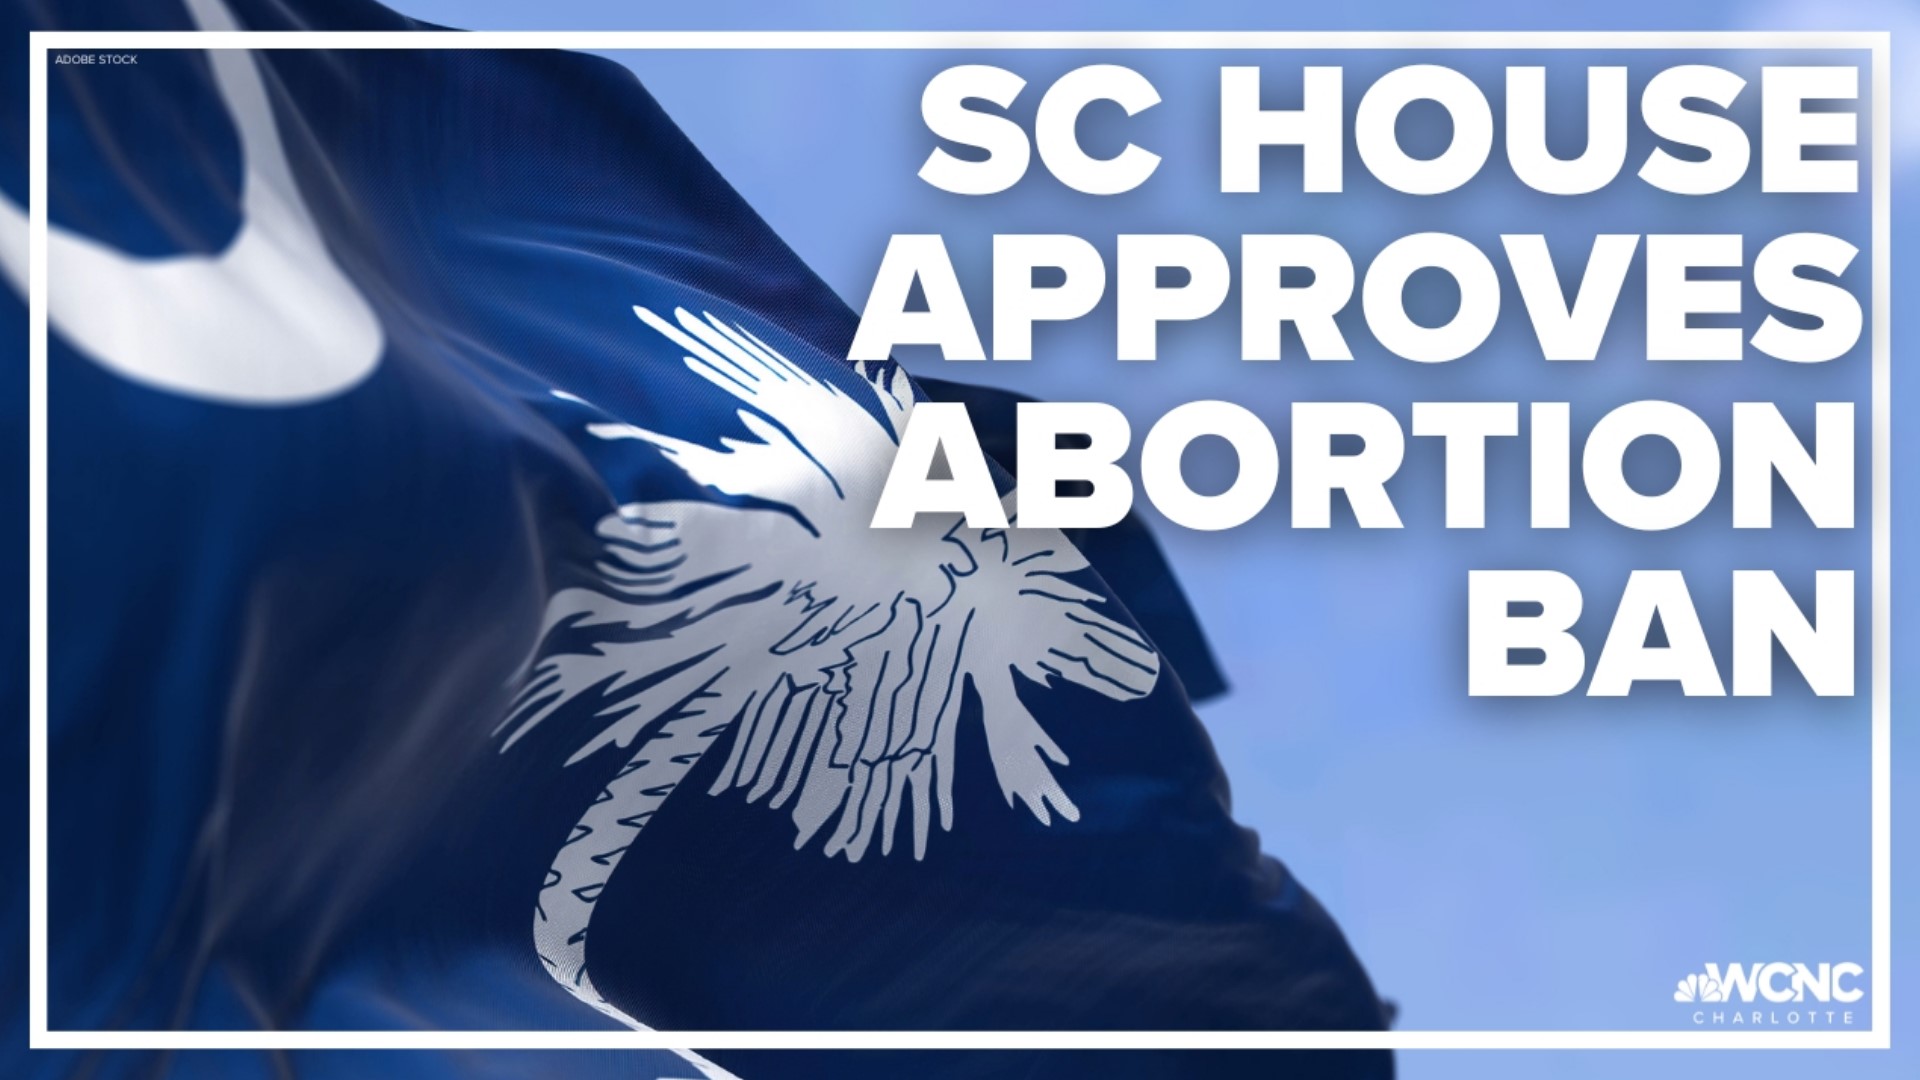 The bill has one more routine vote before it goes to the Senate, where stricter bans on abortions have seen tougher fights.